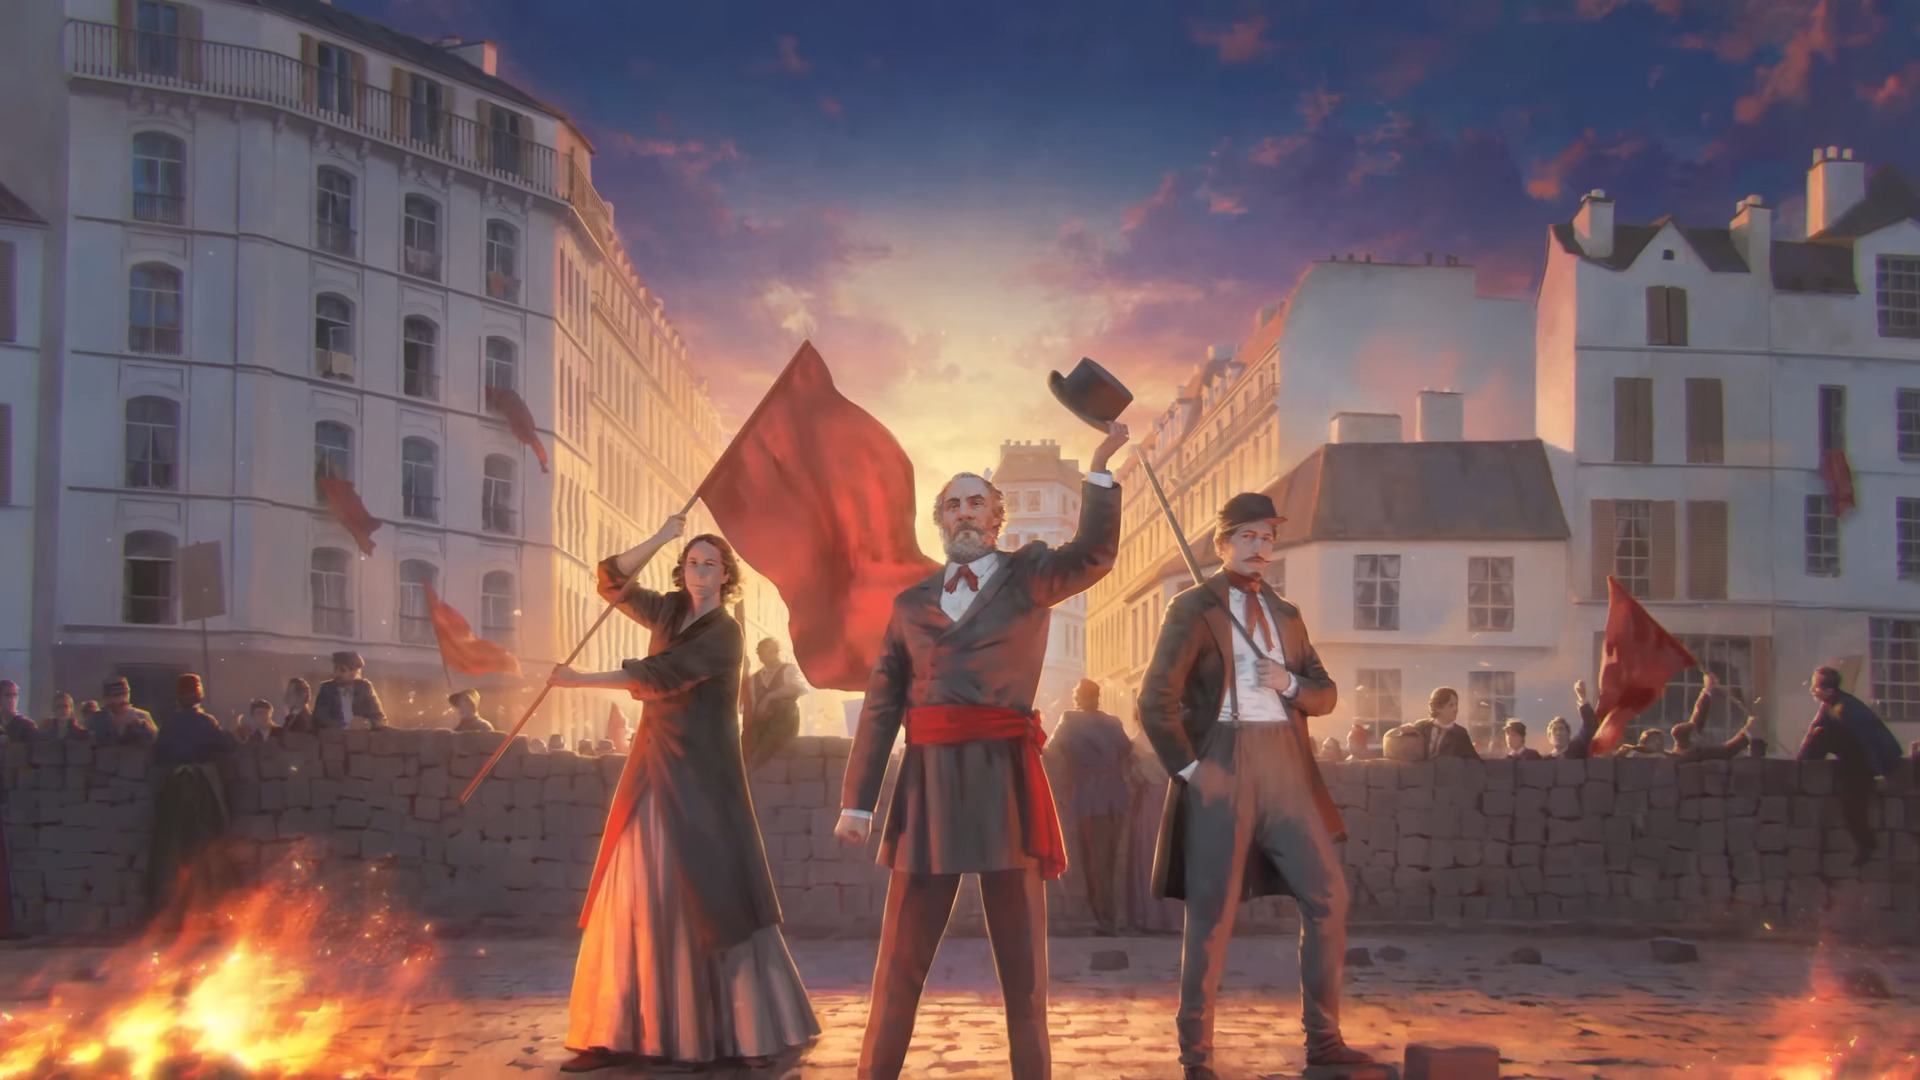  Victoria 3's first gameplay DLC lets you invite Marx and Lenin to your place for tea and revolution 